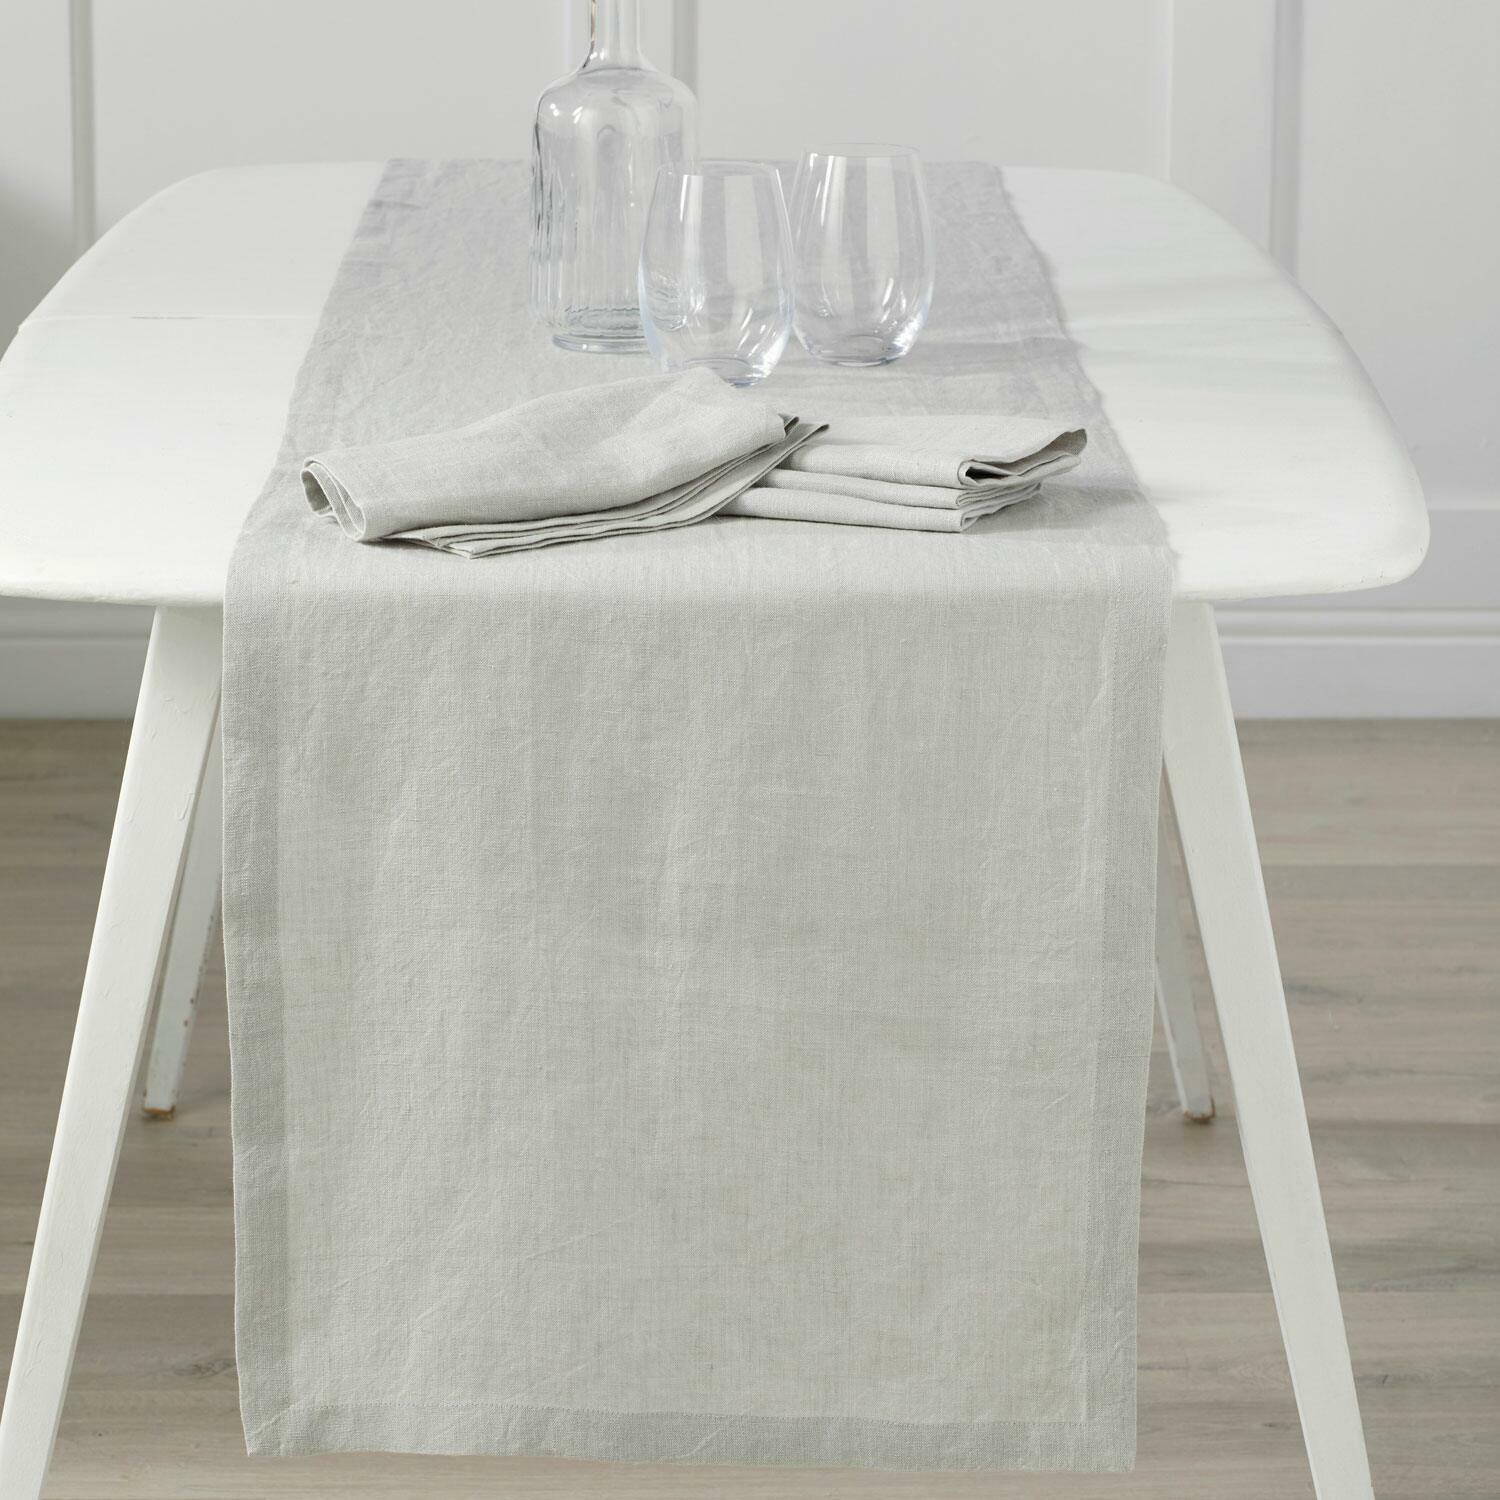 Photo of Graham and green pale grey linen table runner